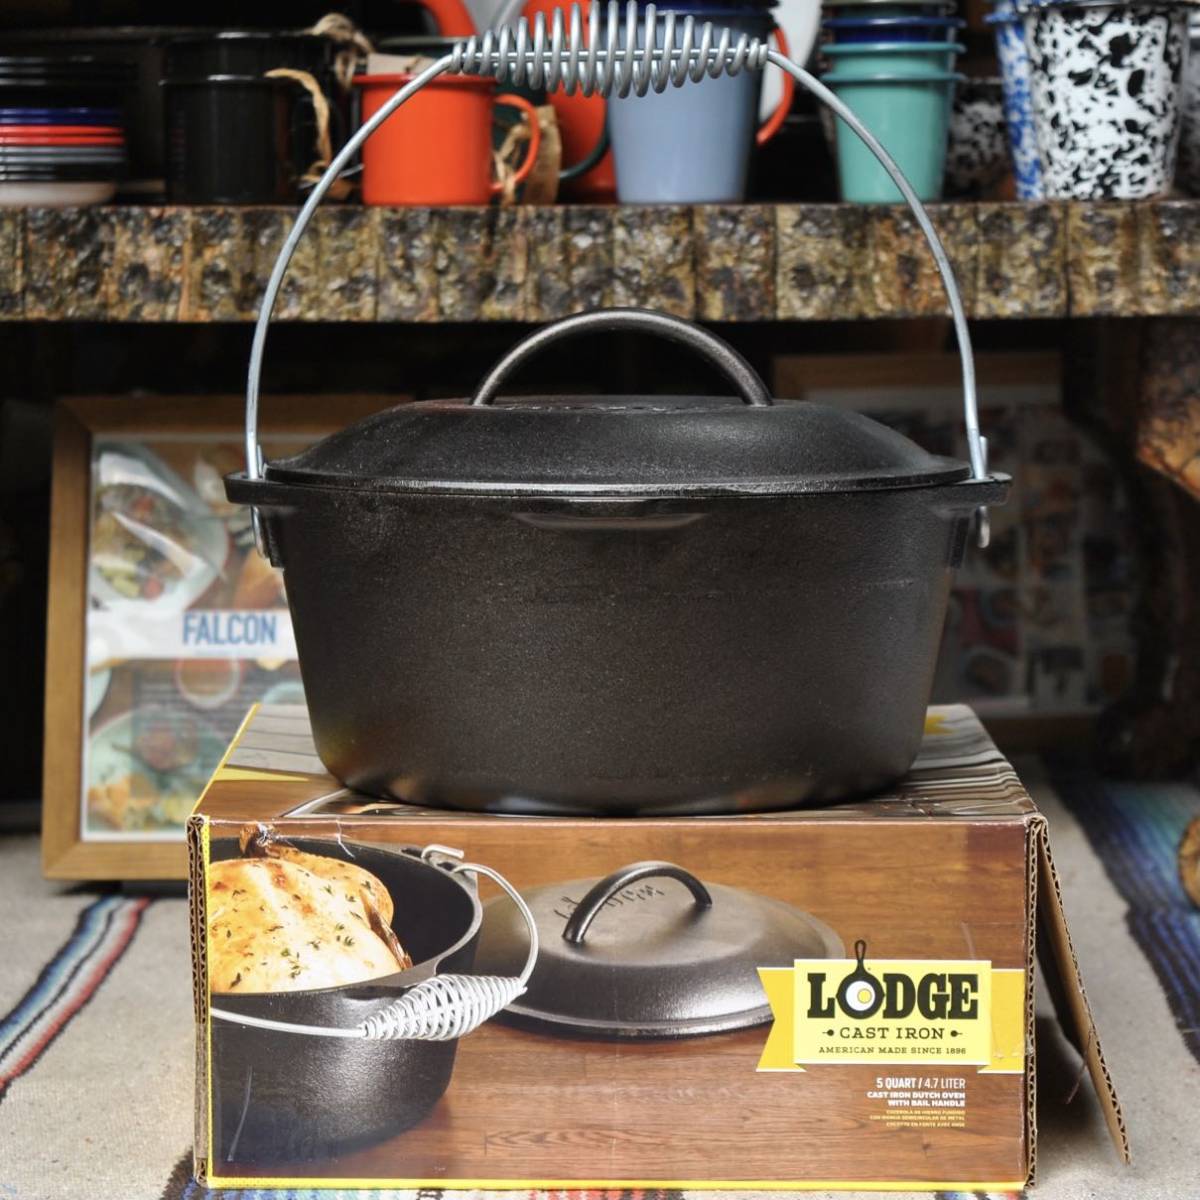  lodge LODGE American made logic ki gold oven home use dutch oven 10-1/4 -inch * outdoor camp kitchen . fire cast iron saucepan 